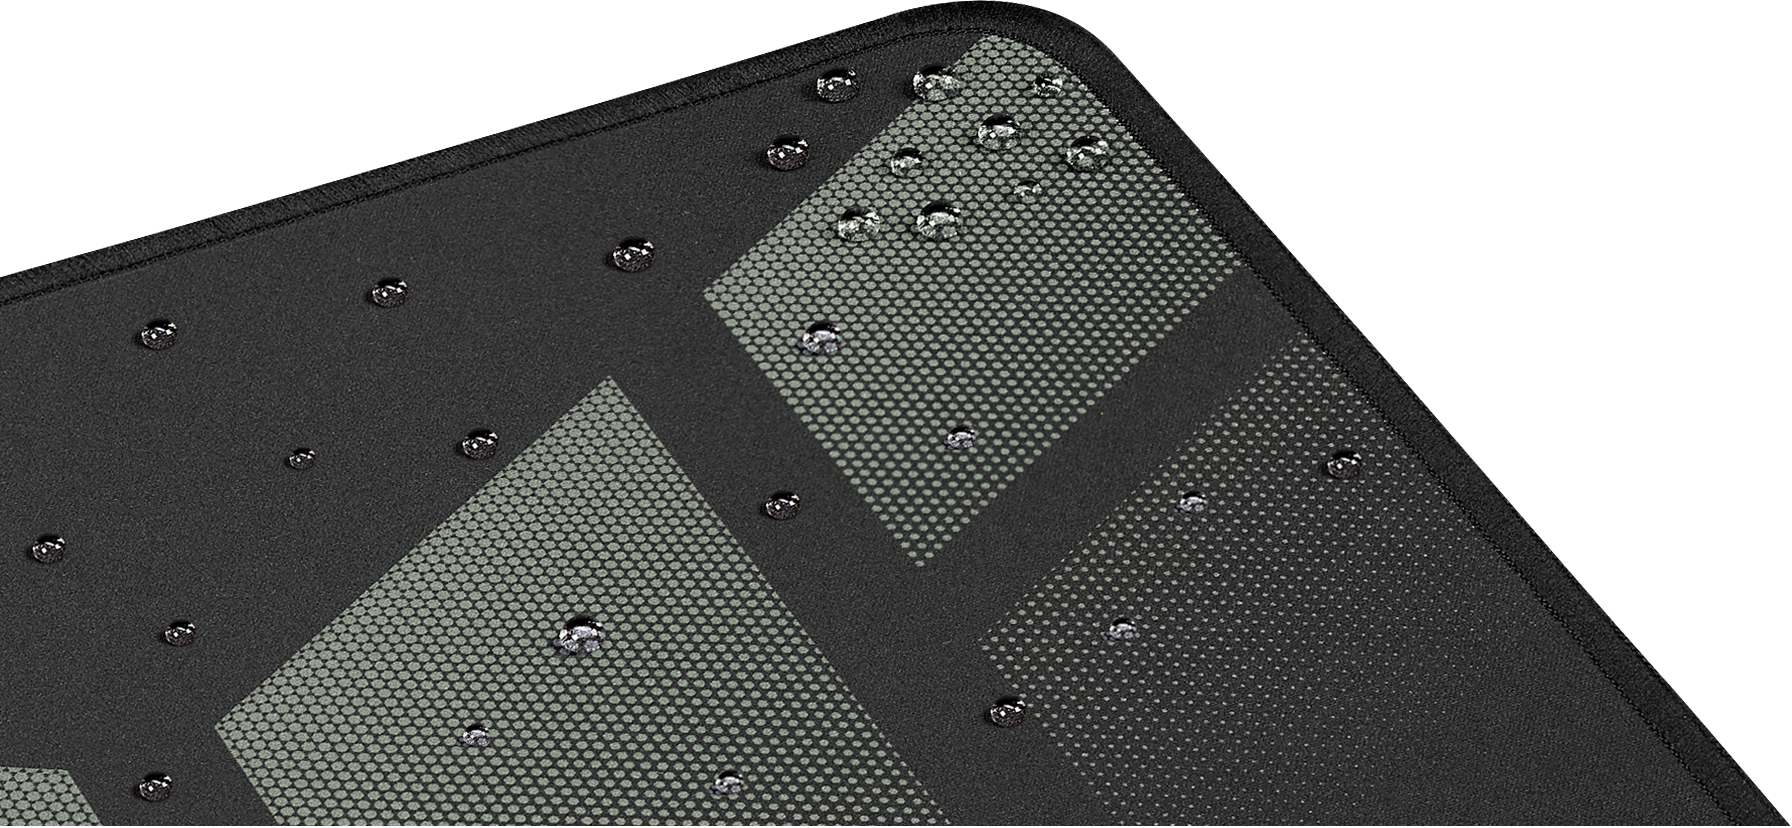 WATER-RESISTANT SURFACE